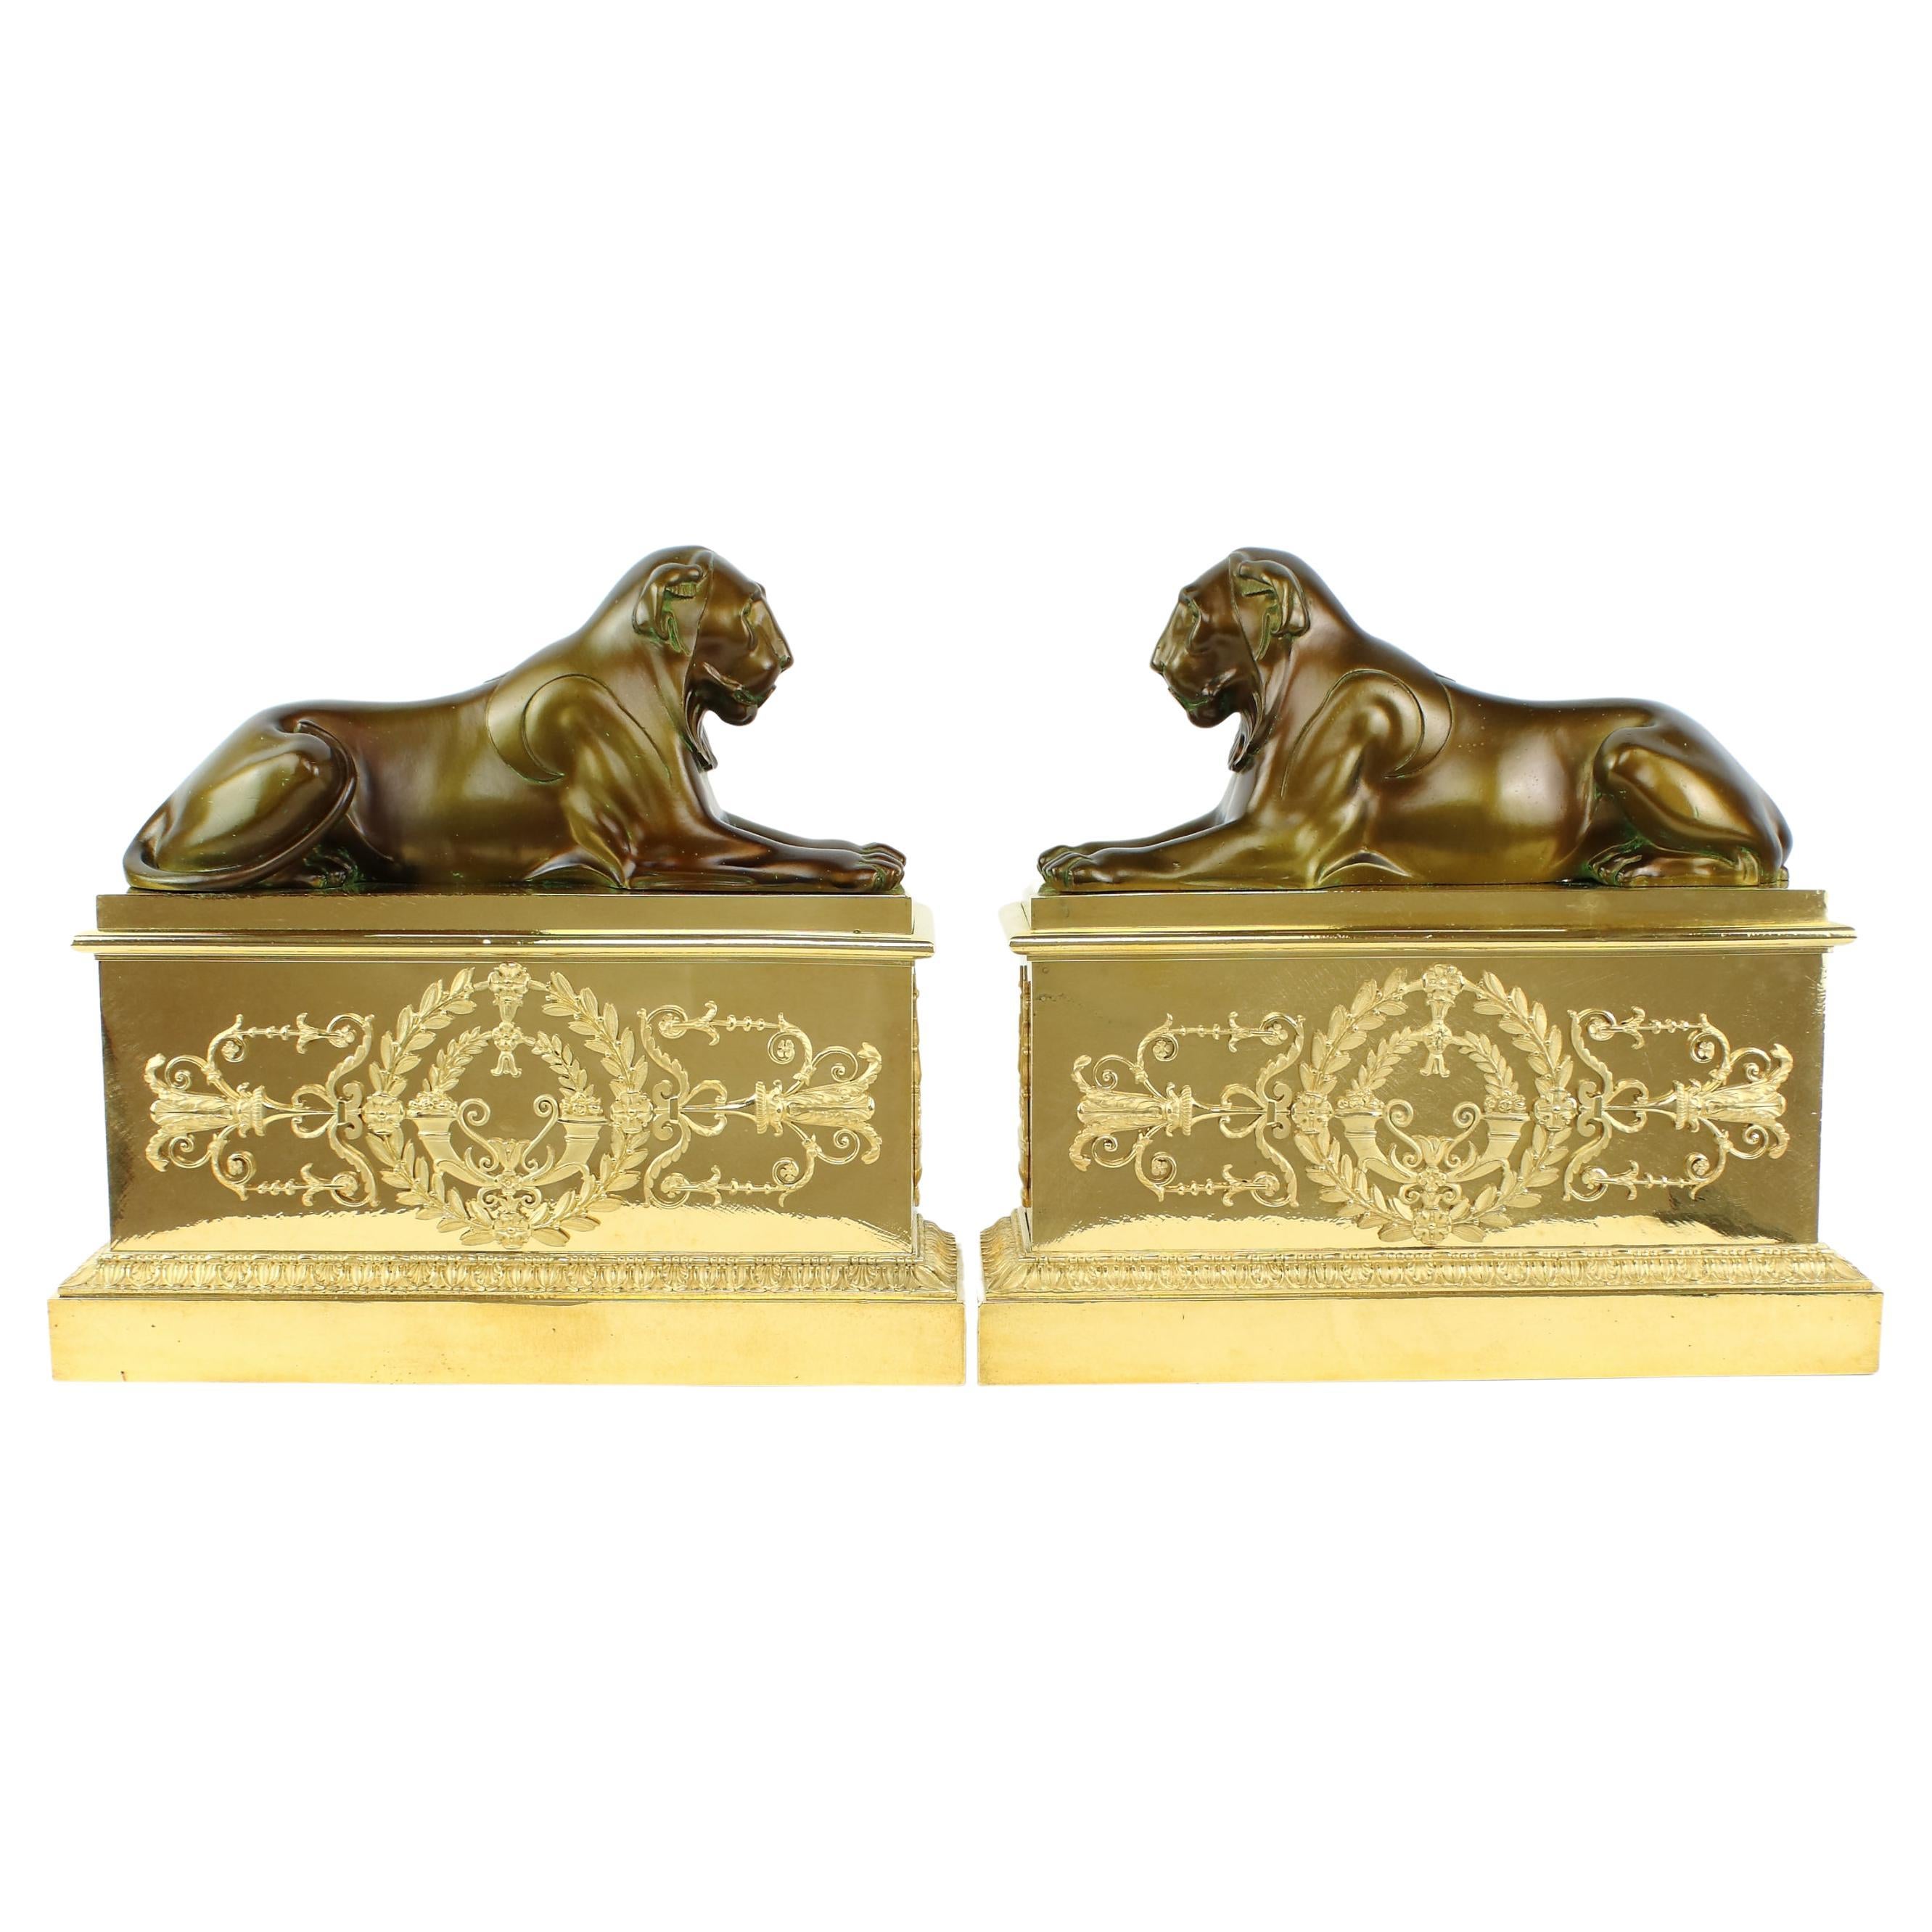 Early 19th Century French Empire Gilt Bronze Lioness Figures Andirons or Chenets For Sale